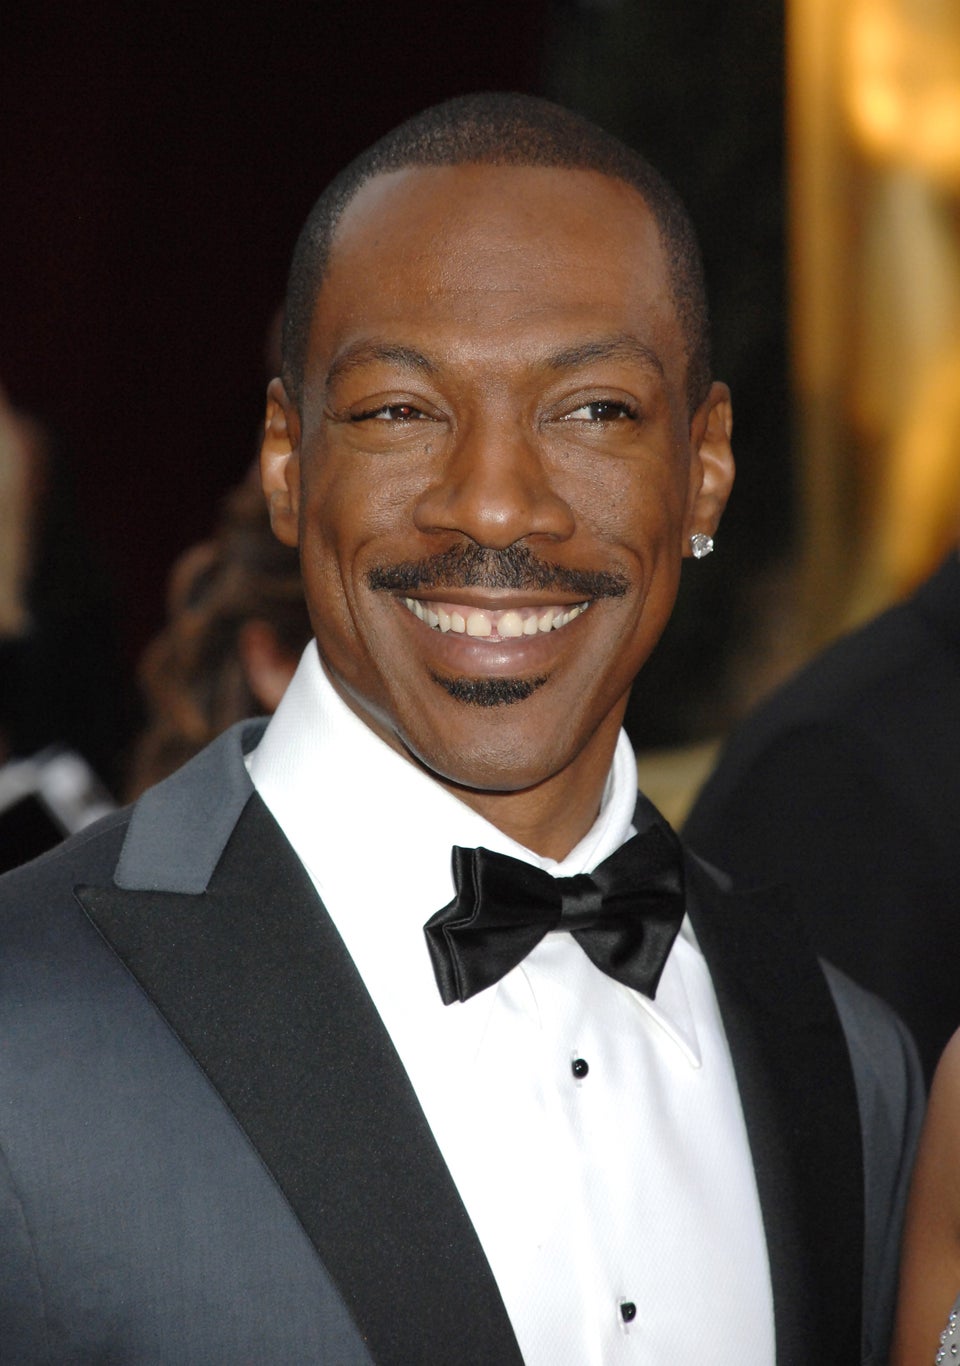 Eddie Murphy to Receive Nation’s Highest Award for Comedy, Will be Honored by Tracy Morgan